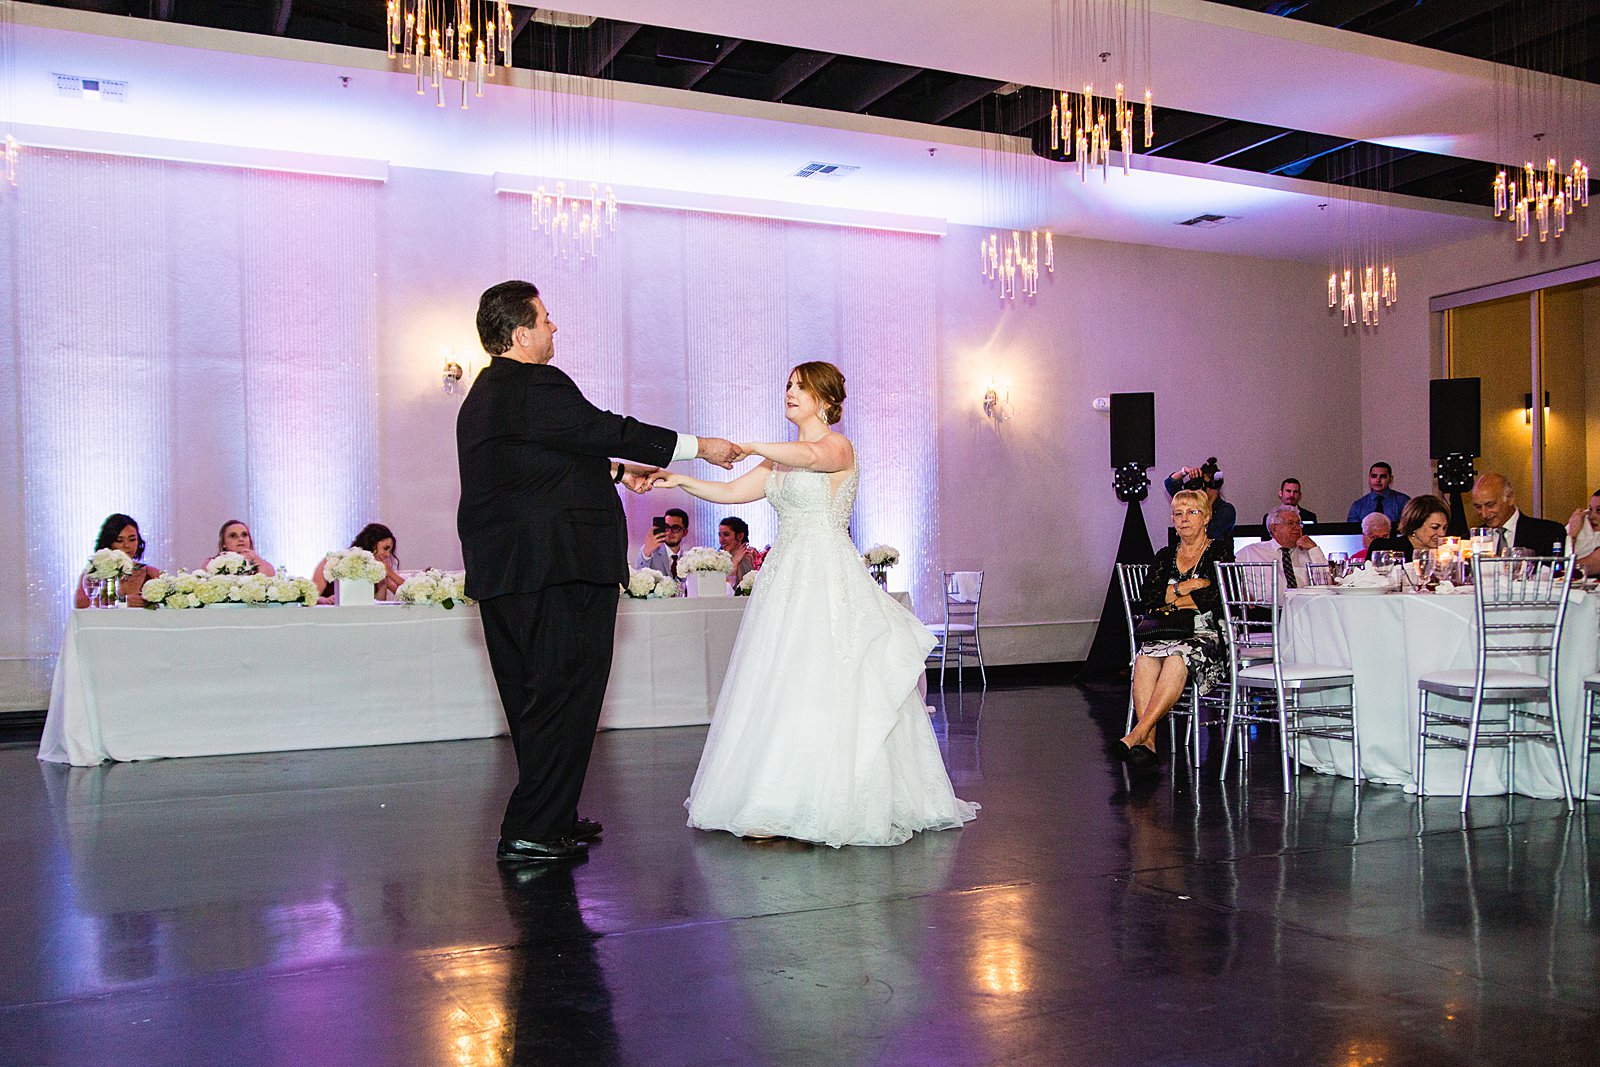 Father daughter dance at SoHo63 wedding reception by Chandler wedding photographer PMA Photography